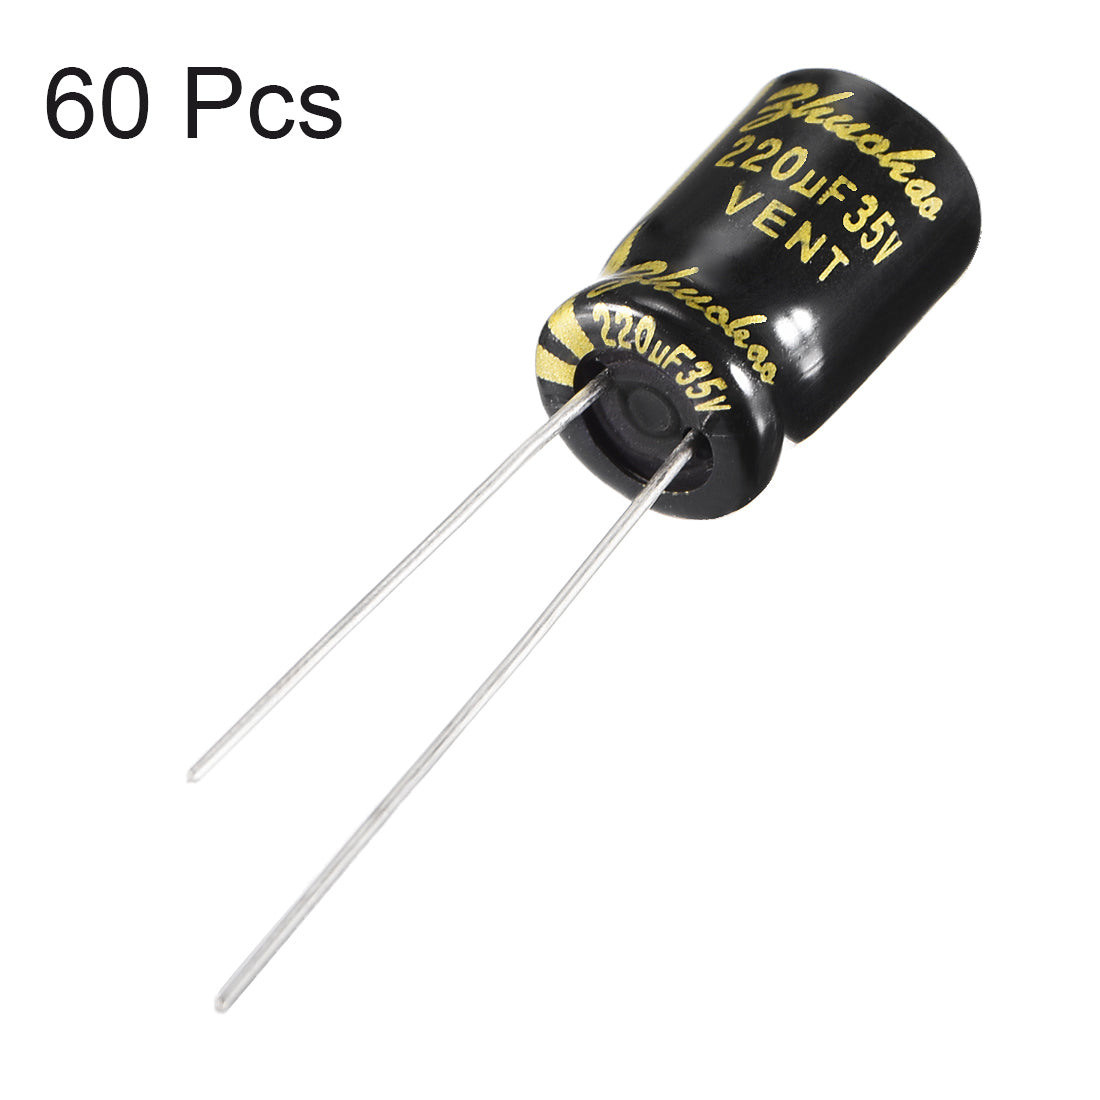 uxcell Uxcell Aluminum Radial Electrolytic Capacitor with 220uF 35V 105 Celsius Life 2000H 8 x 12 mm Black 60pcs